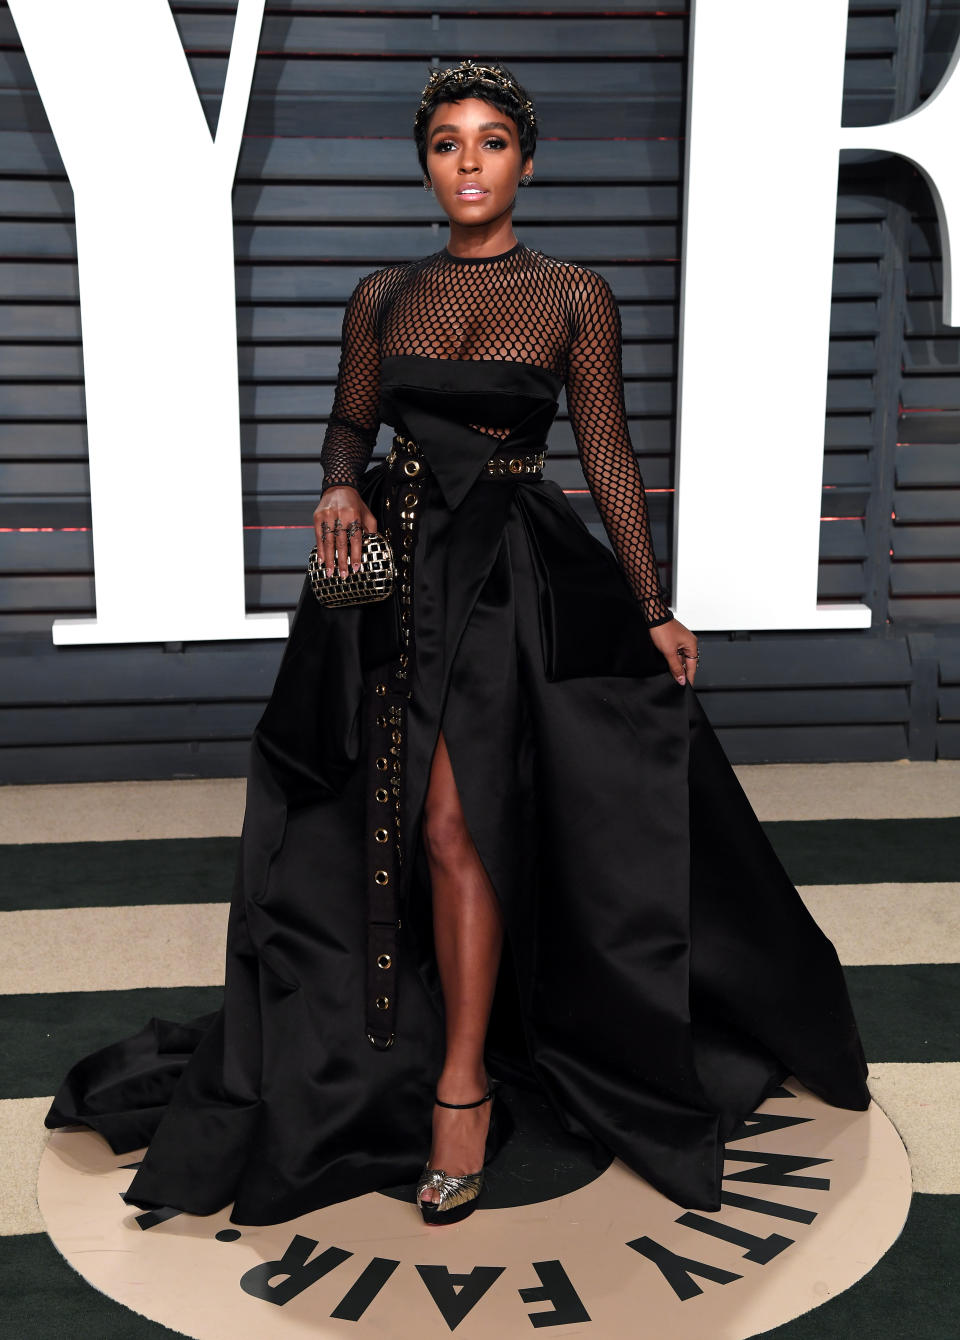 Janelle Monae at the Vanity Fair Oscar Party [Photo: Getty]